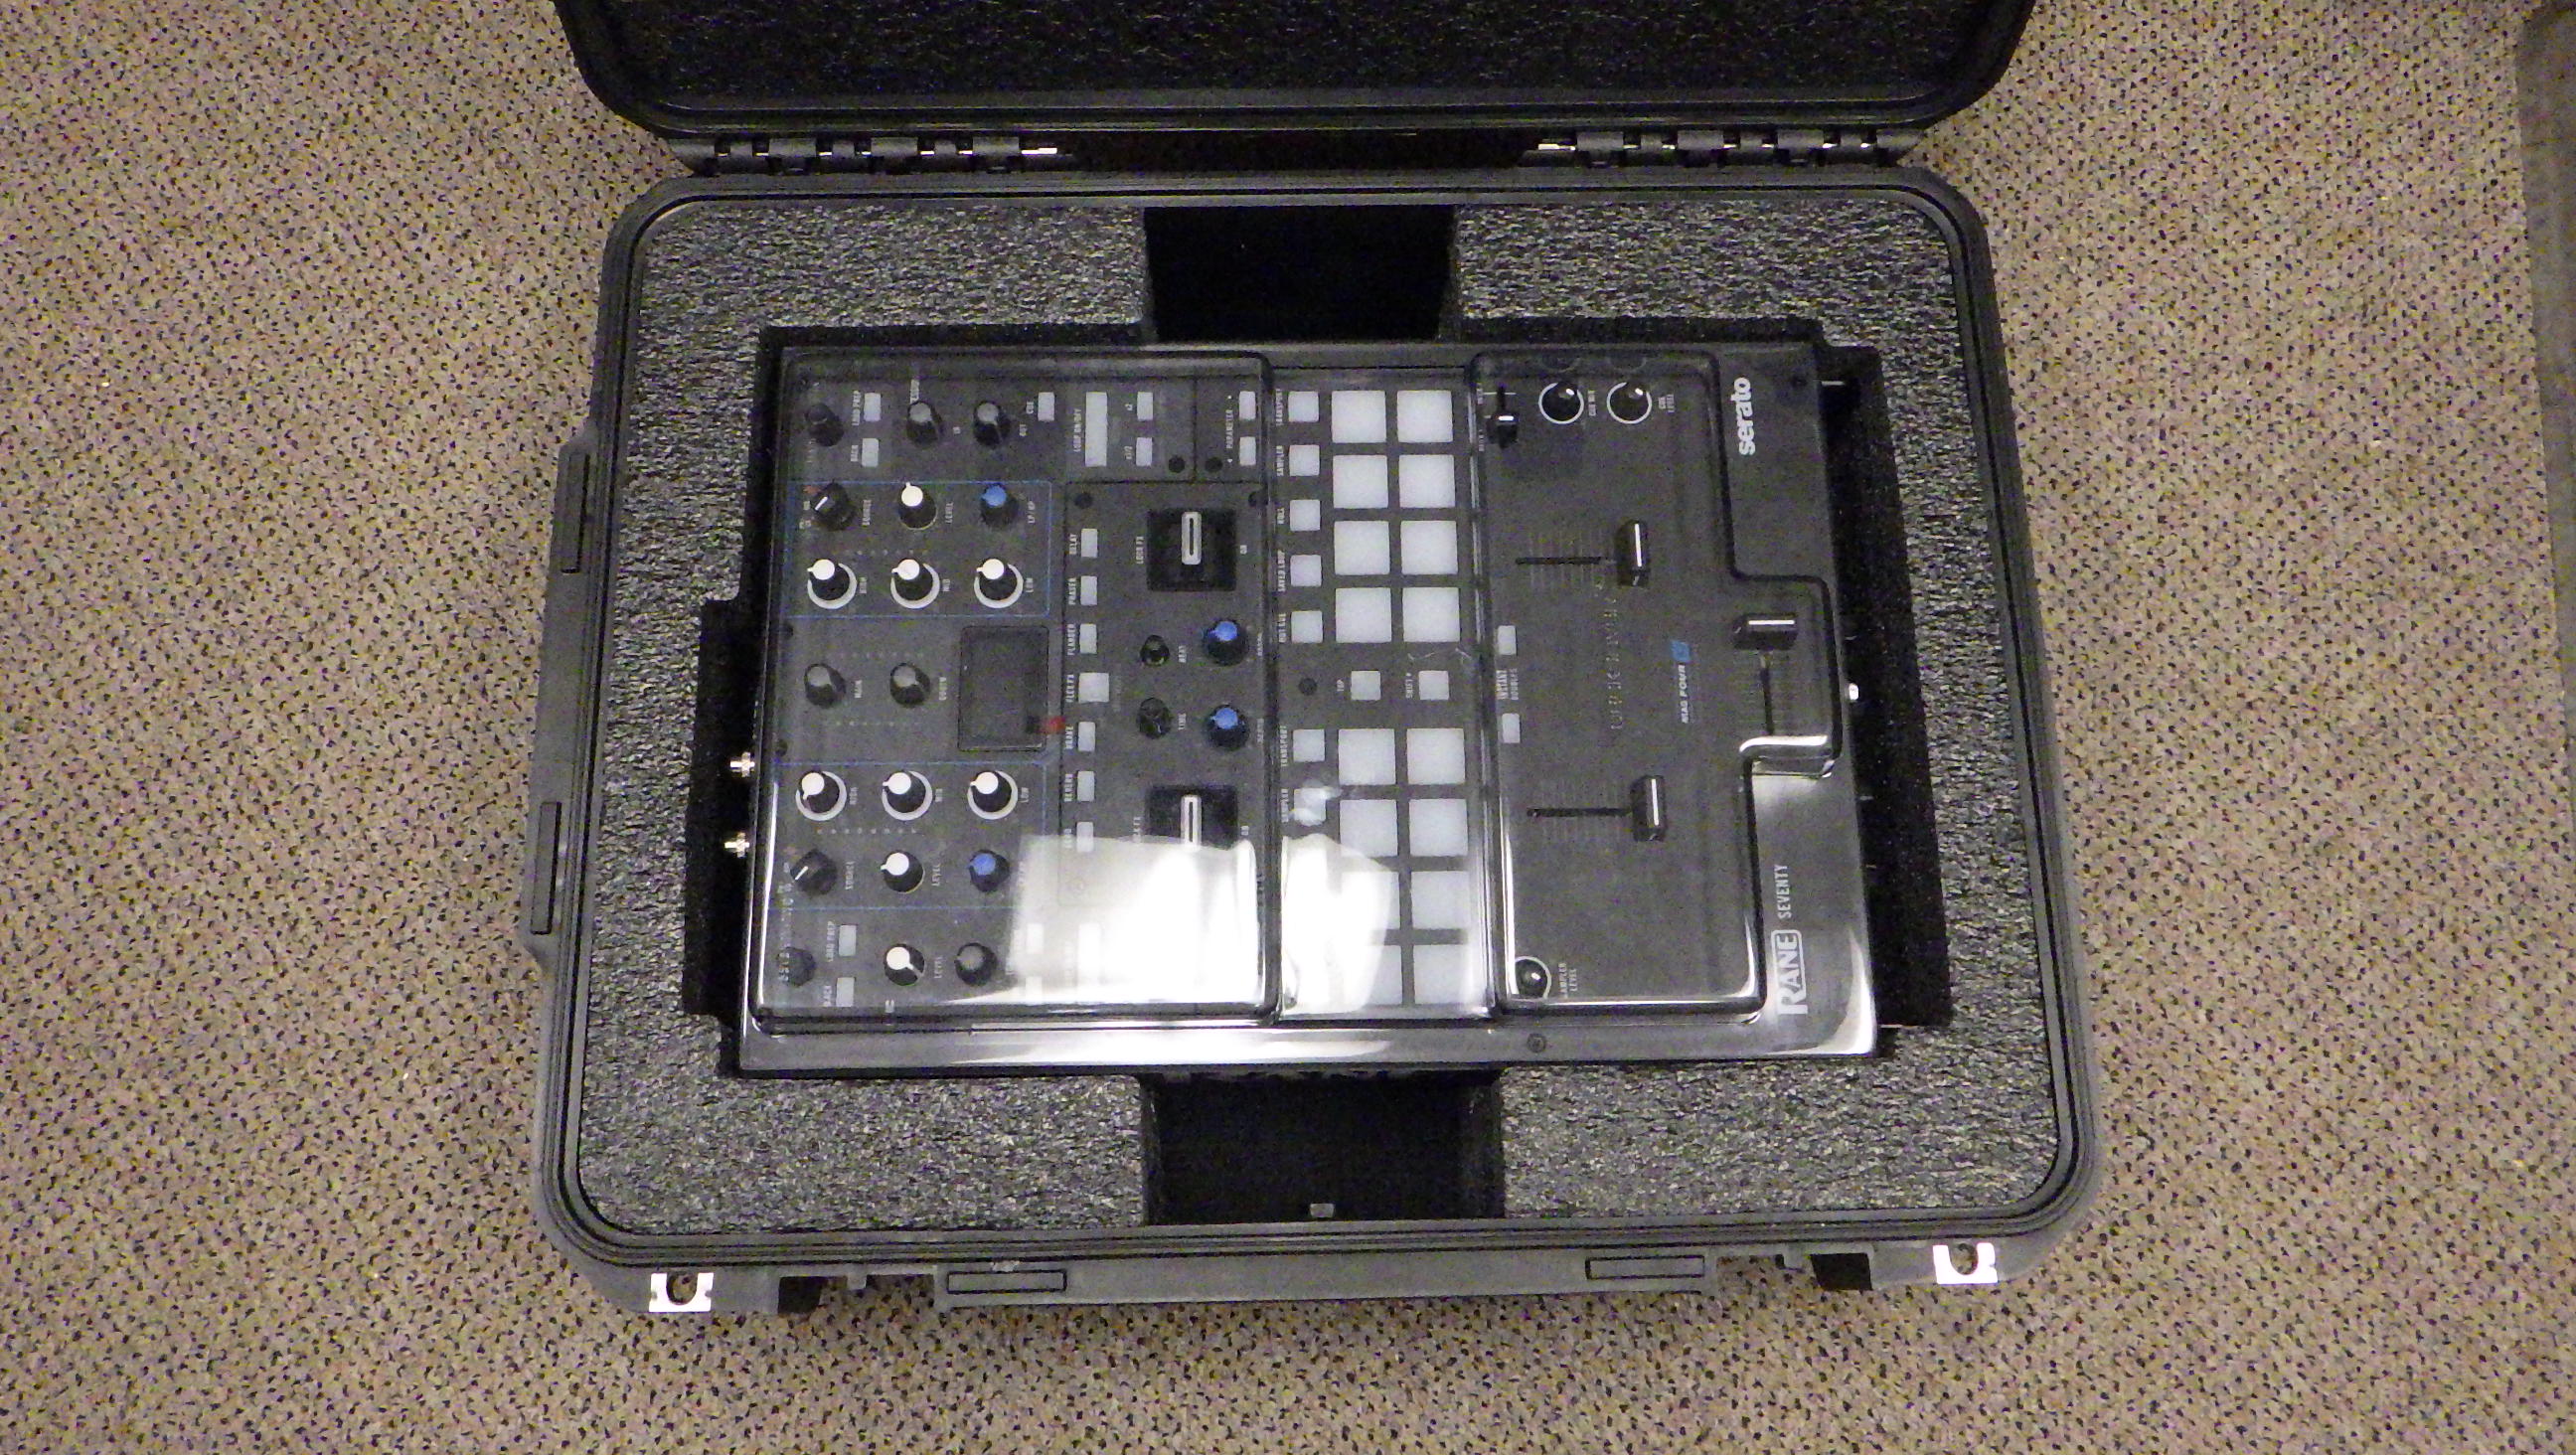 Print # 9608 - SKB 3i-2015-7 Retrofitted for Rane Seventy 2-Channel Battle DJ Mixer By Nelson Case Corp